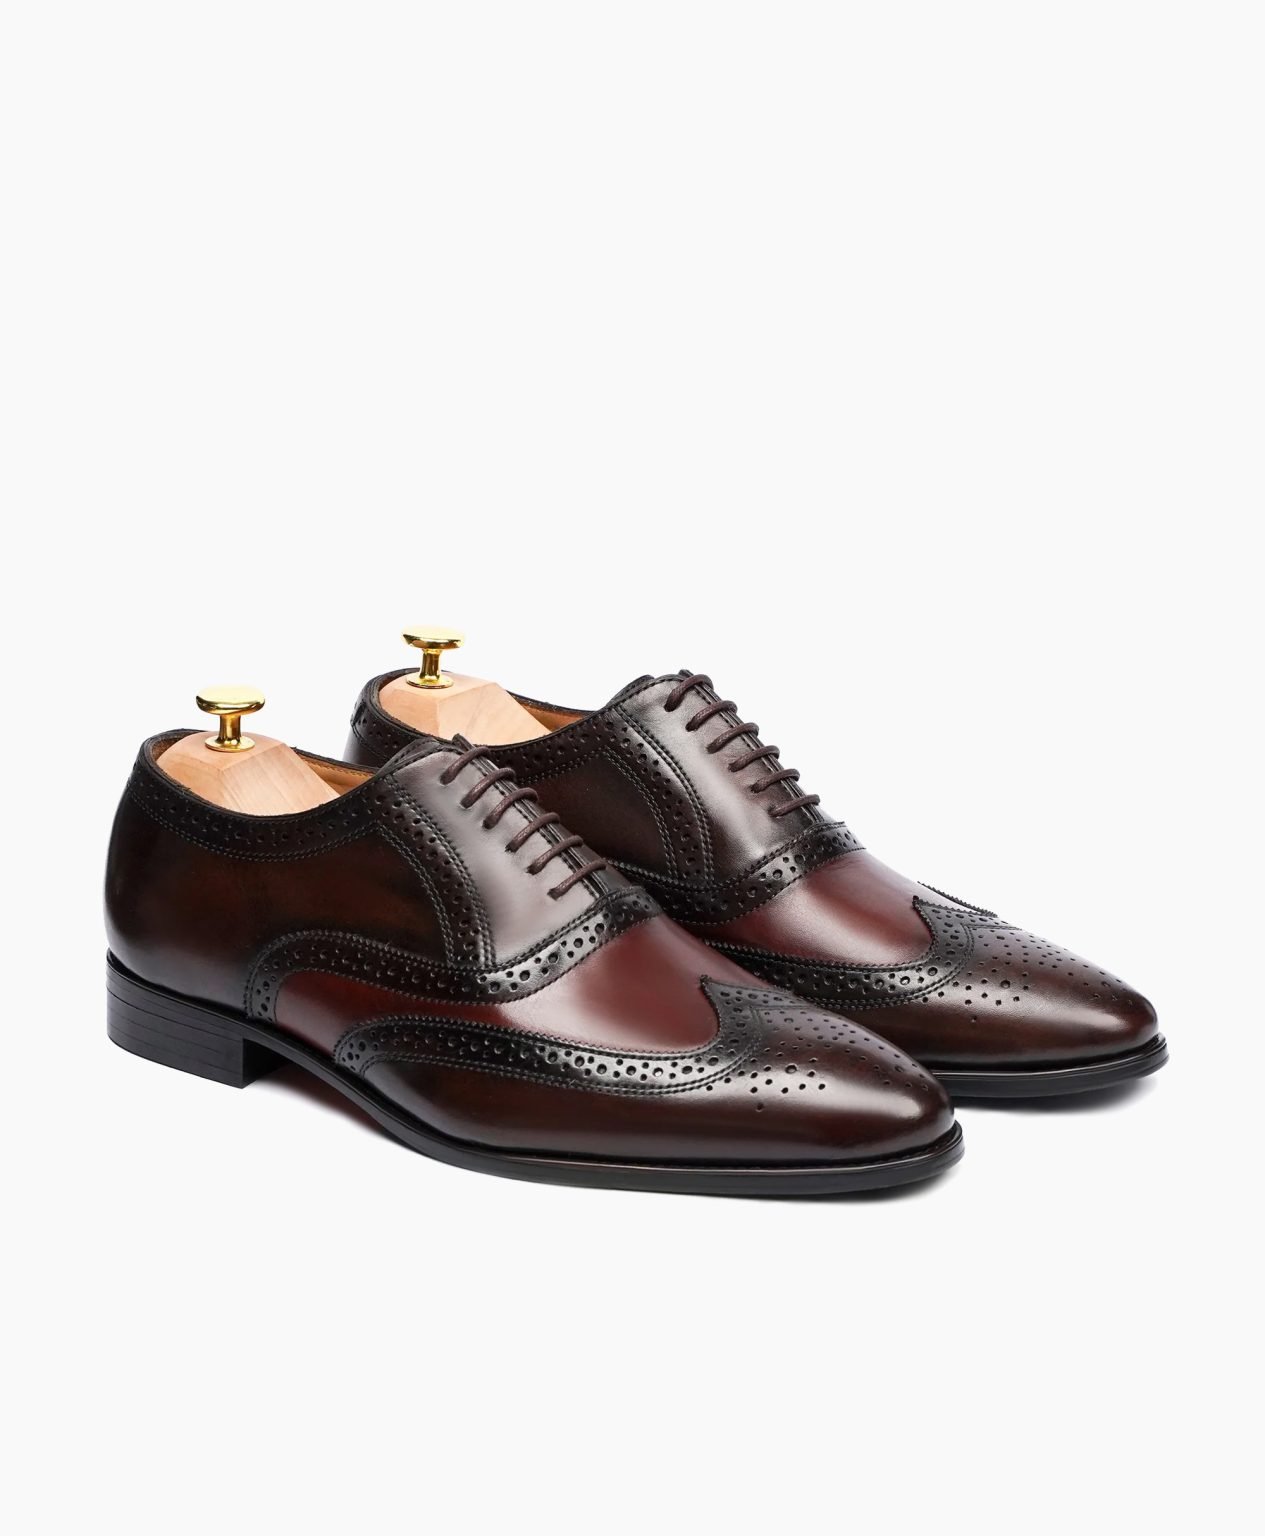 northwich-oxford-burnish-brown-leather-shoes-image200